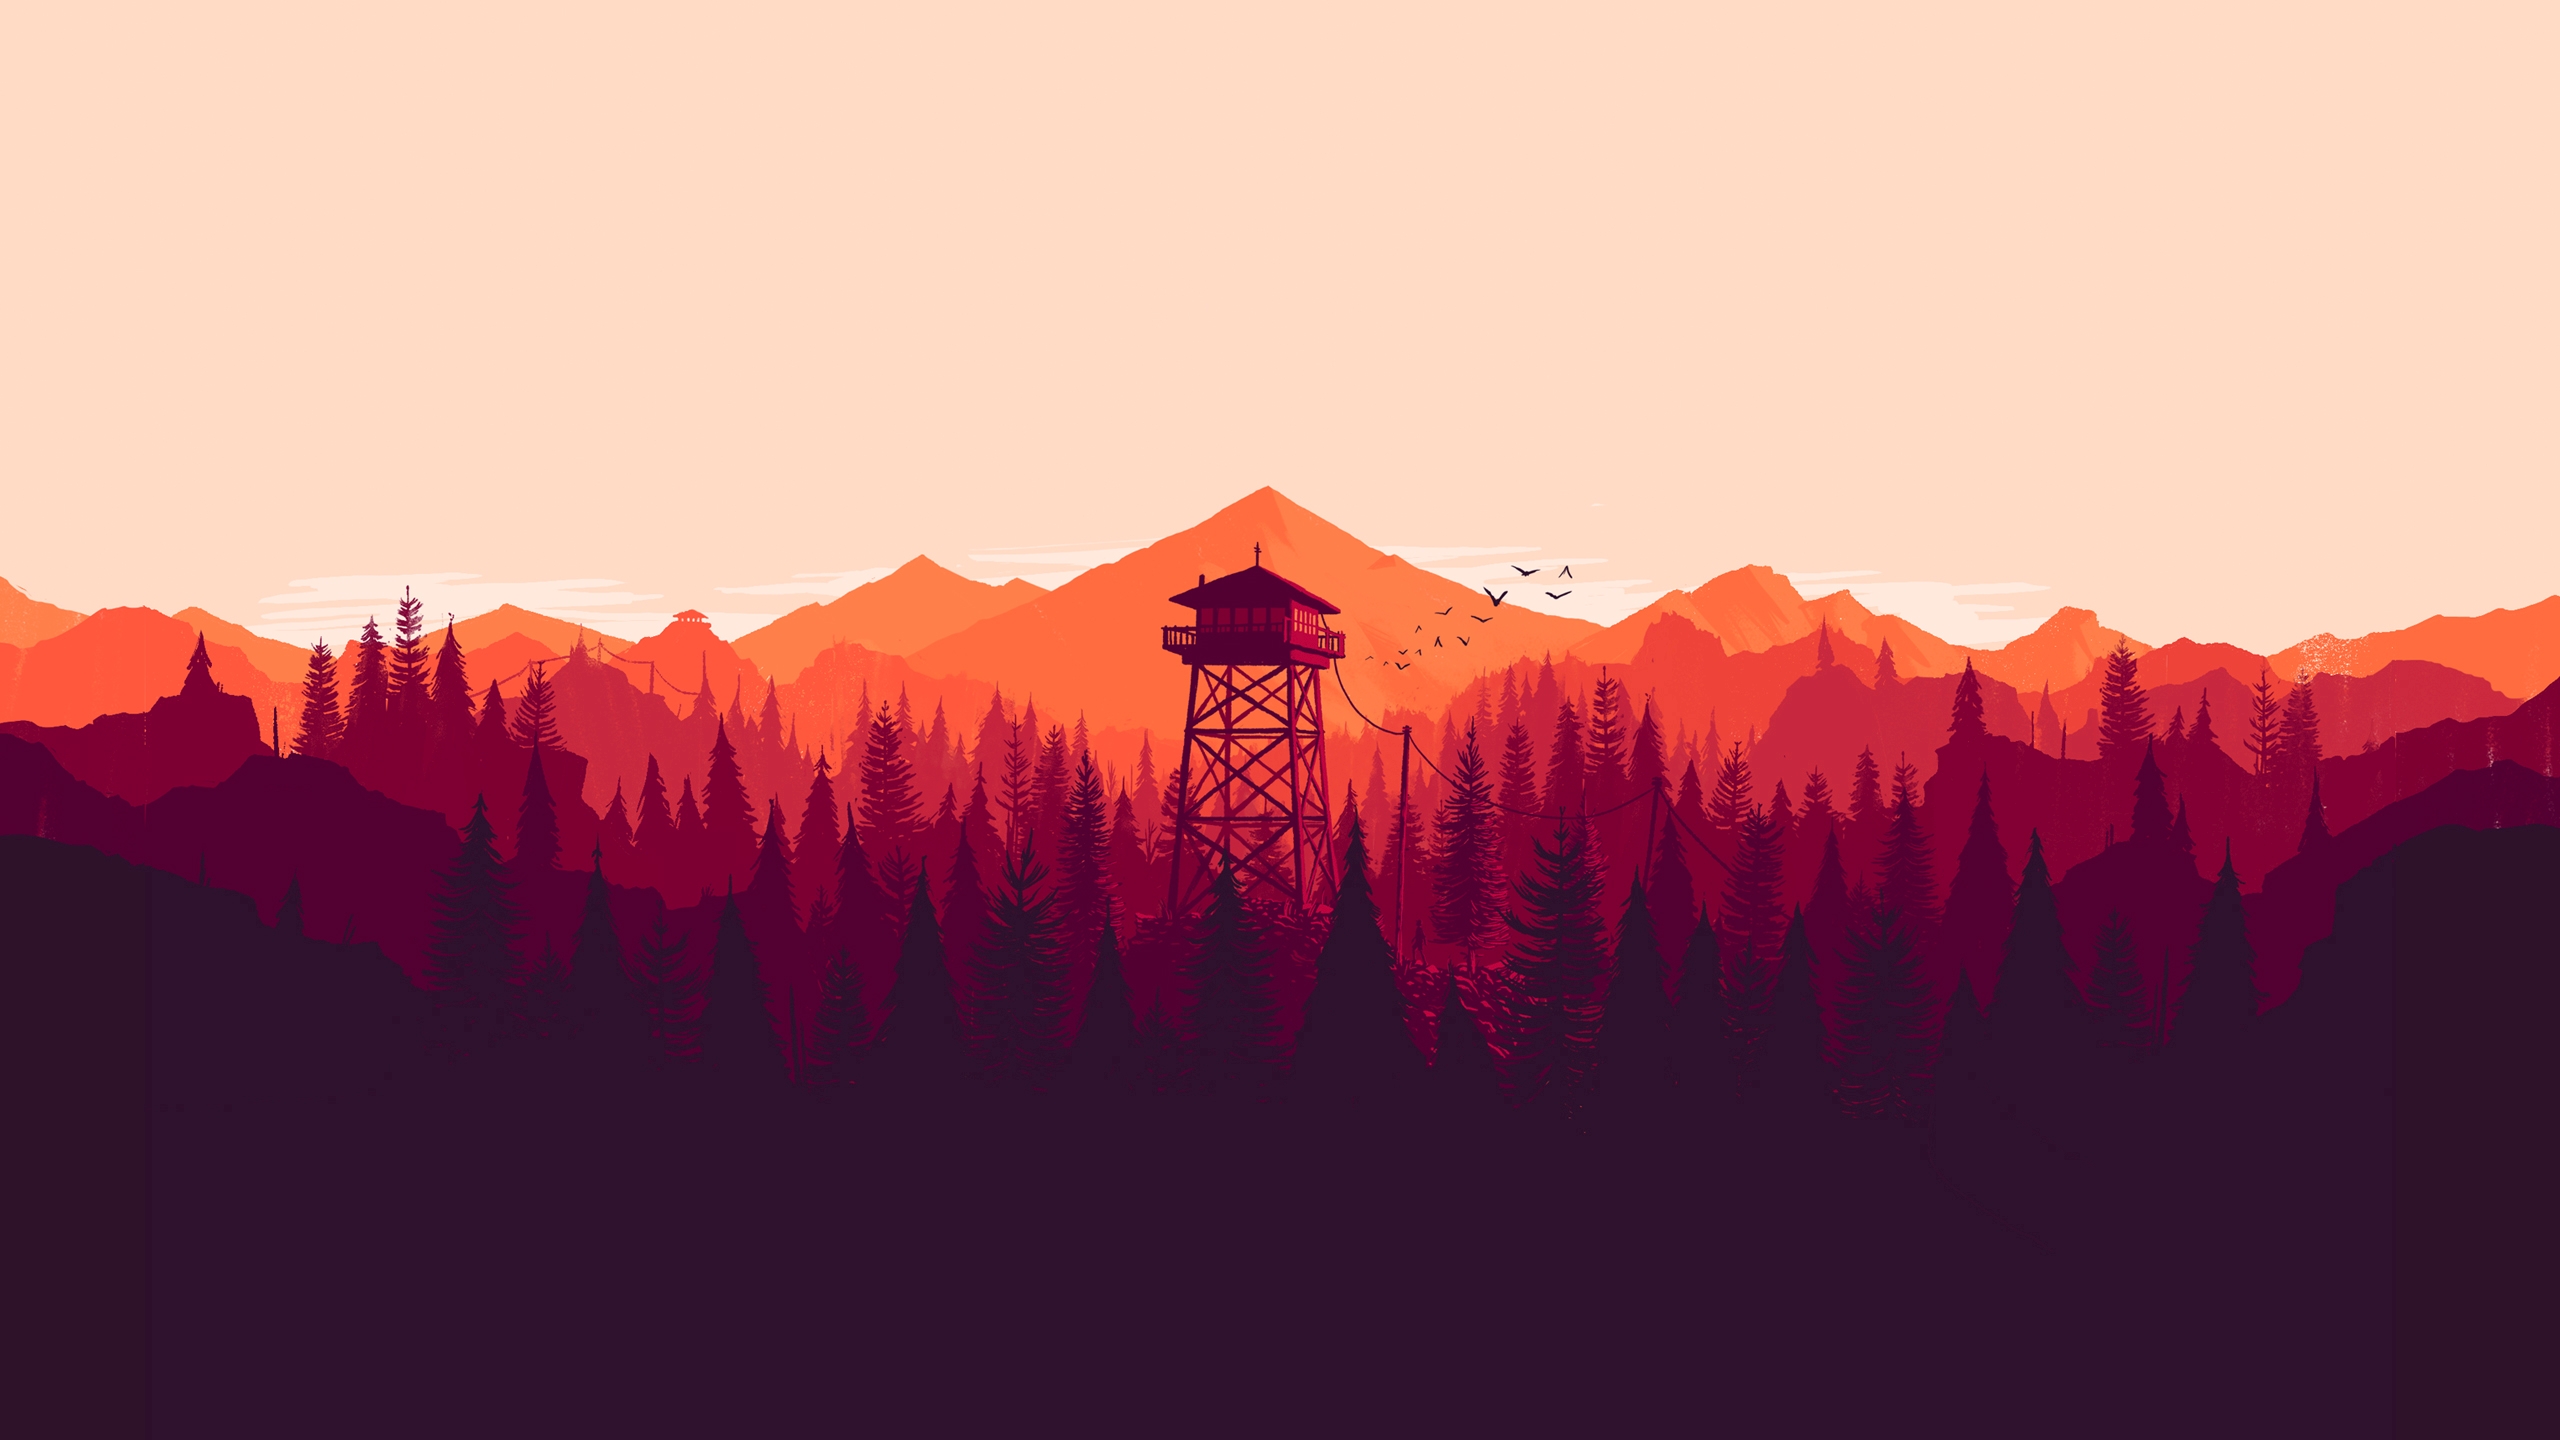 Firewatch Is Looking Very, Very Pretty